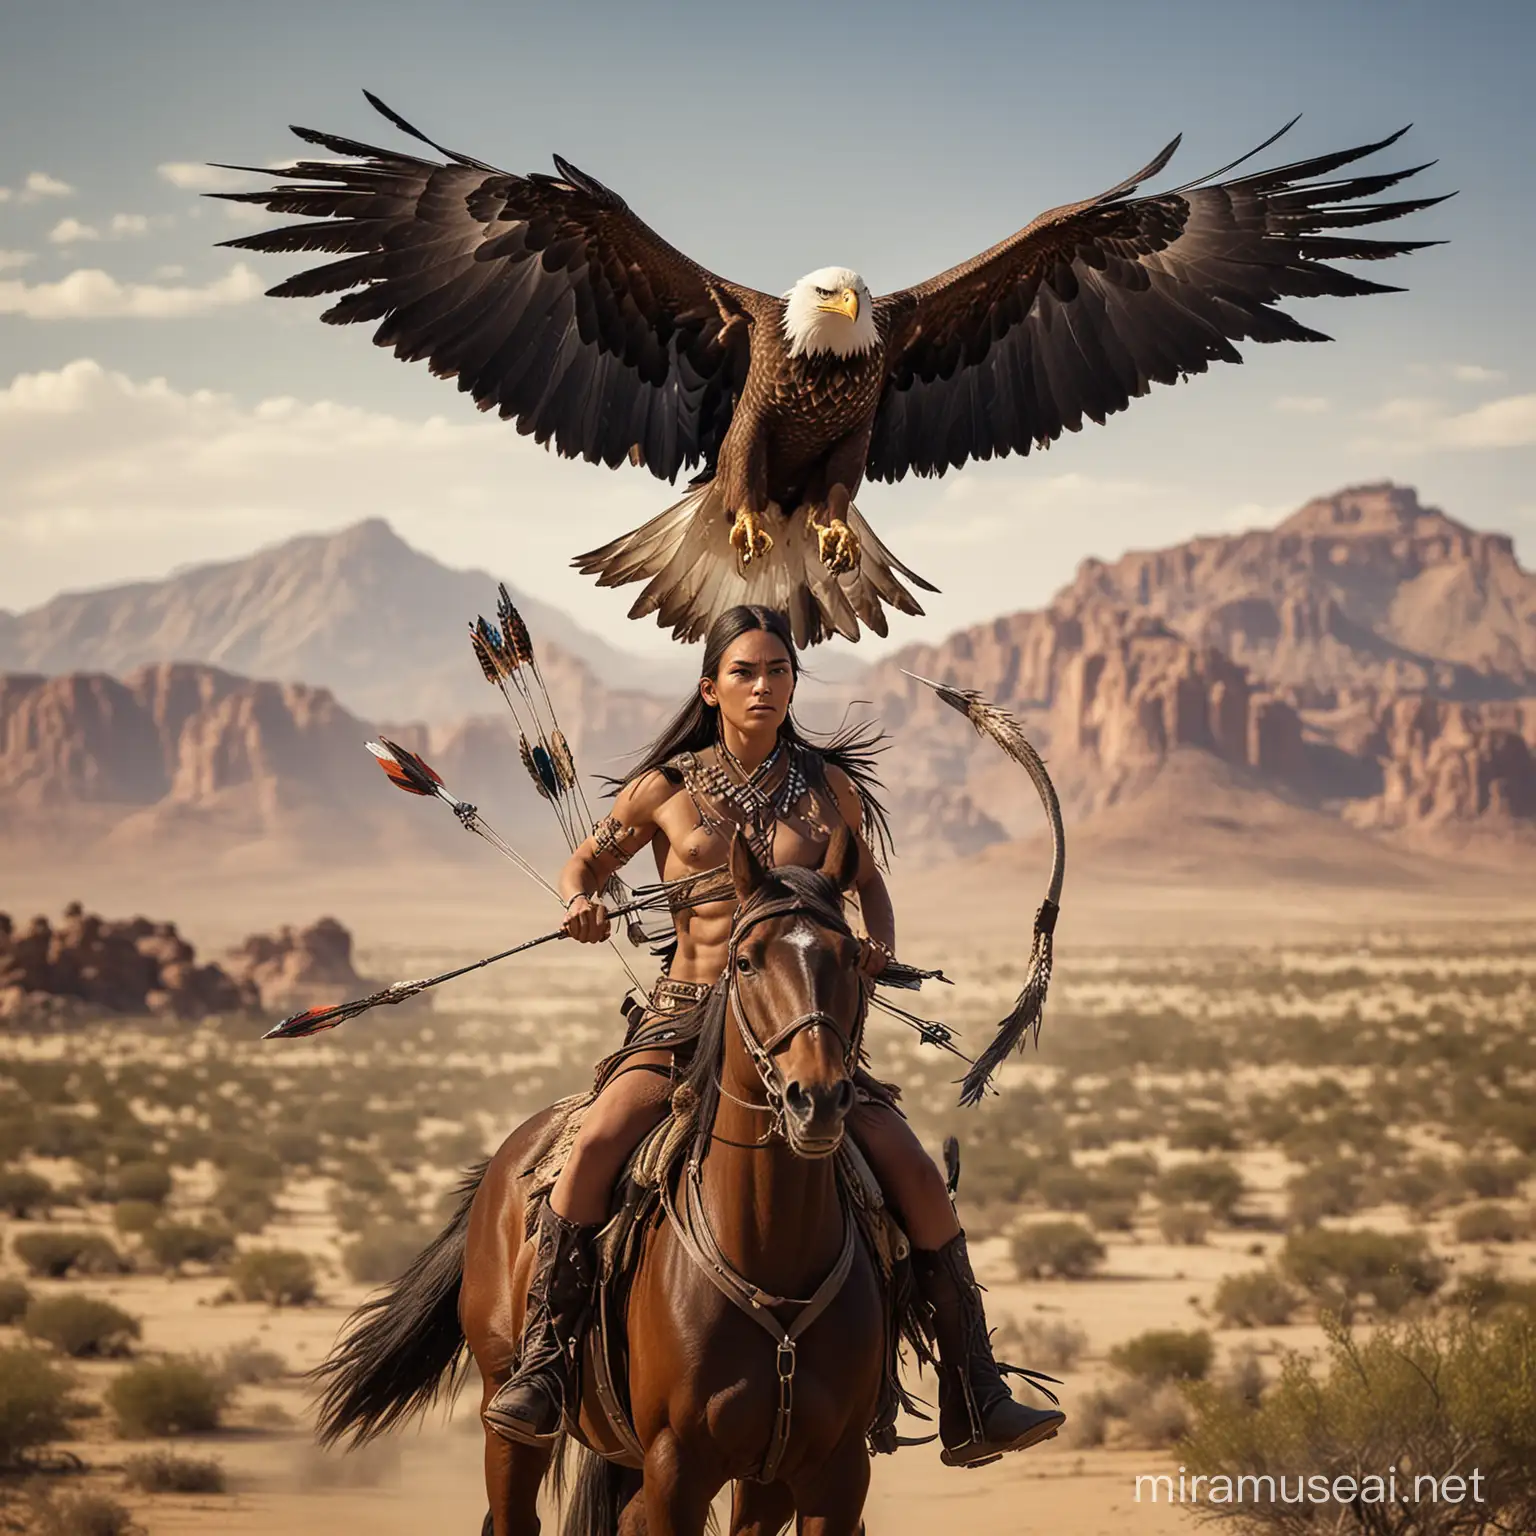 Apache Warrior on Horseback with Wings and Eagle Companion